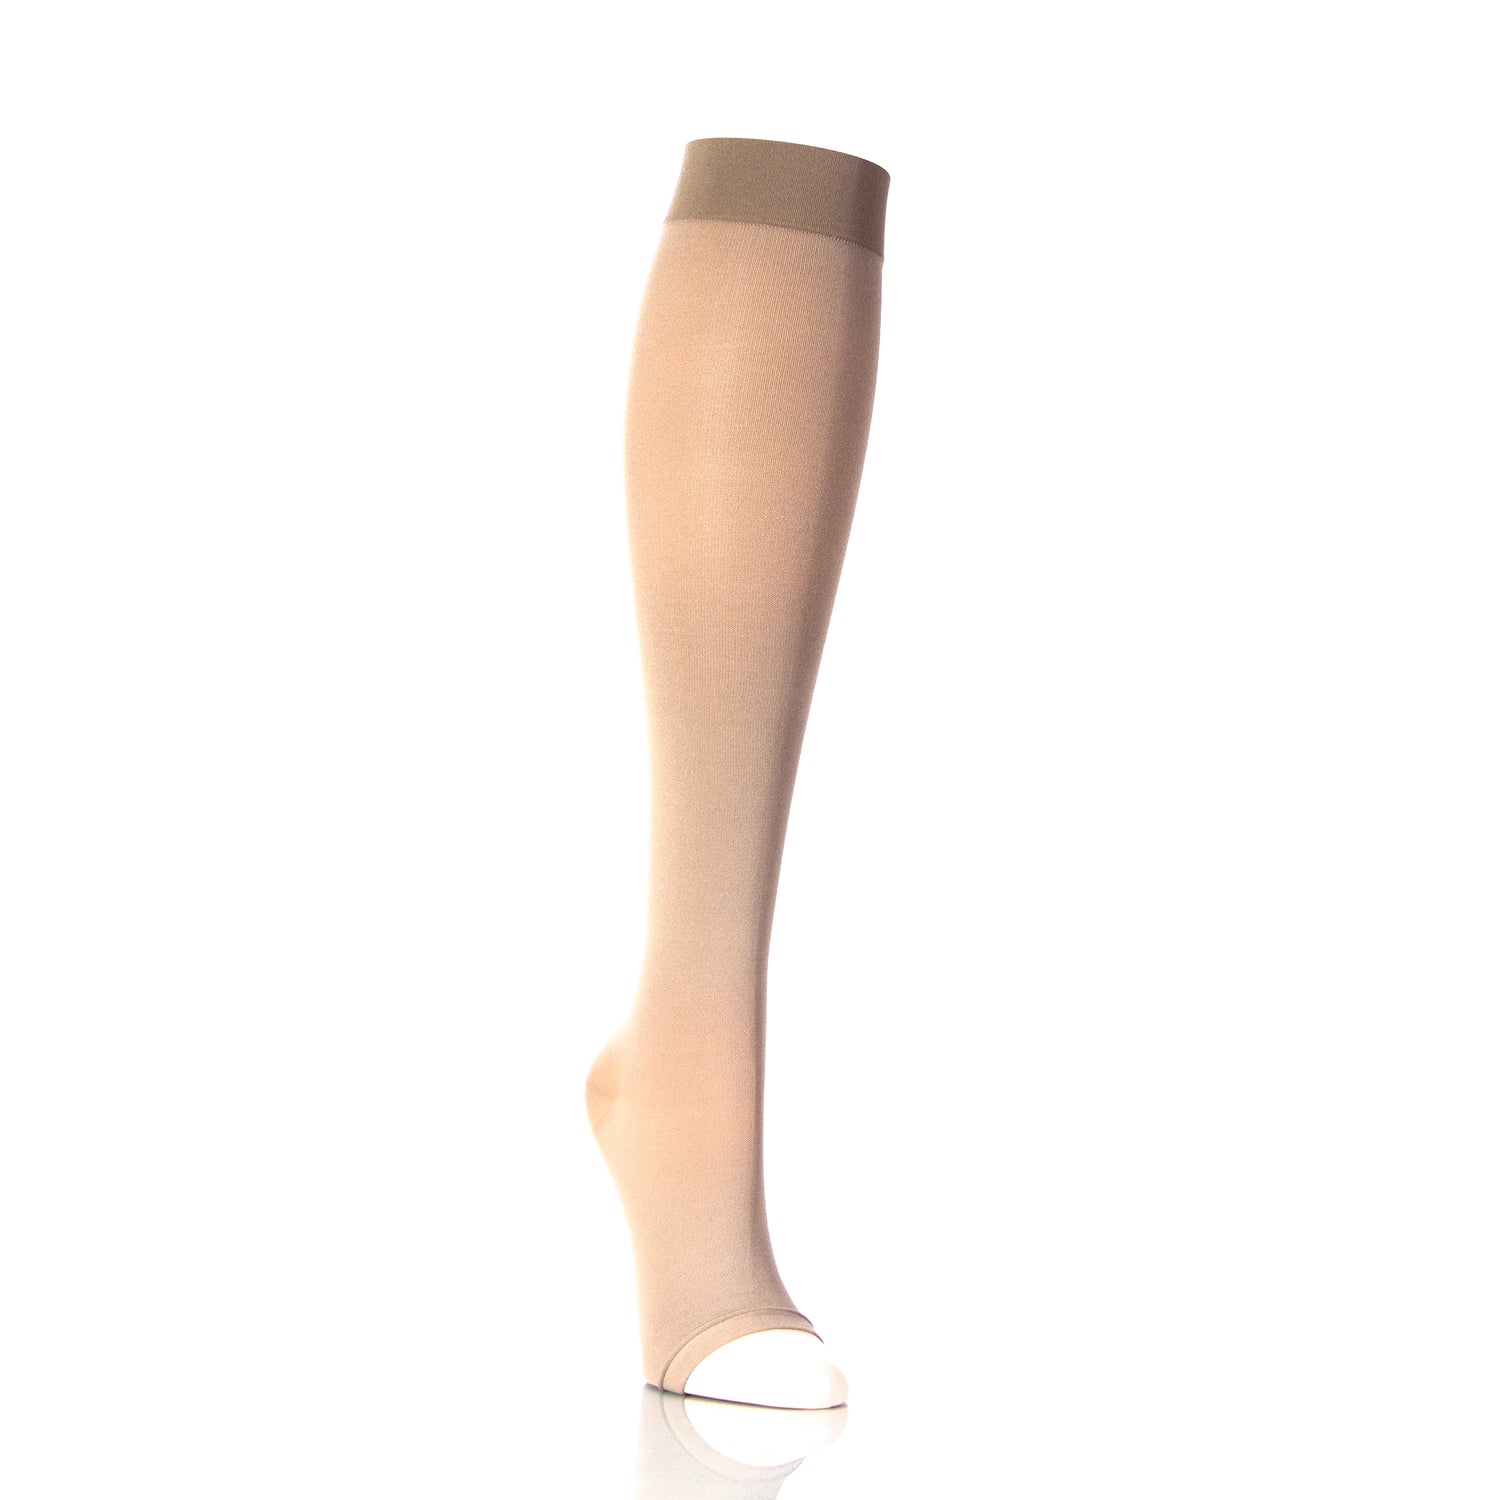 Women's Thigh High Open Toe Compression Stockings 20 30 Mmhg